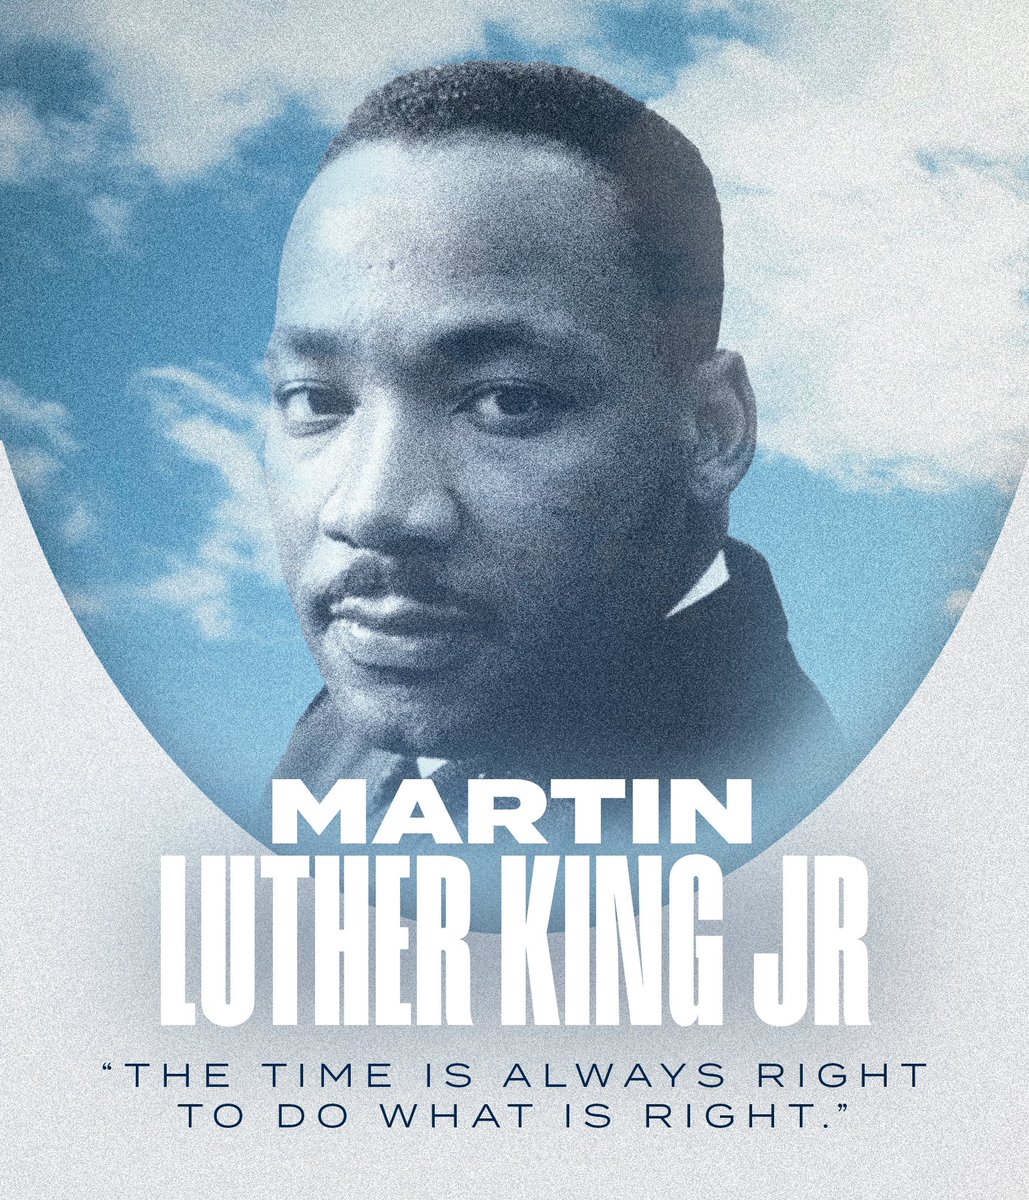 Today, we honor the life and legacy of Dr. Martin Luther King Jr. #MLKDay